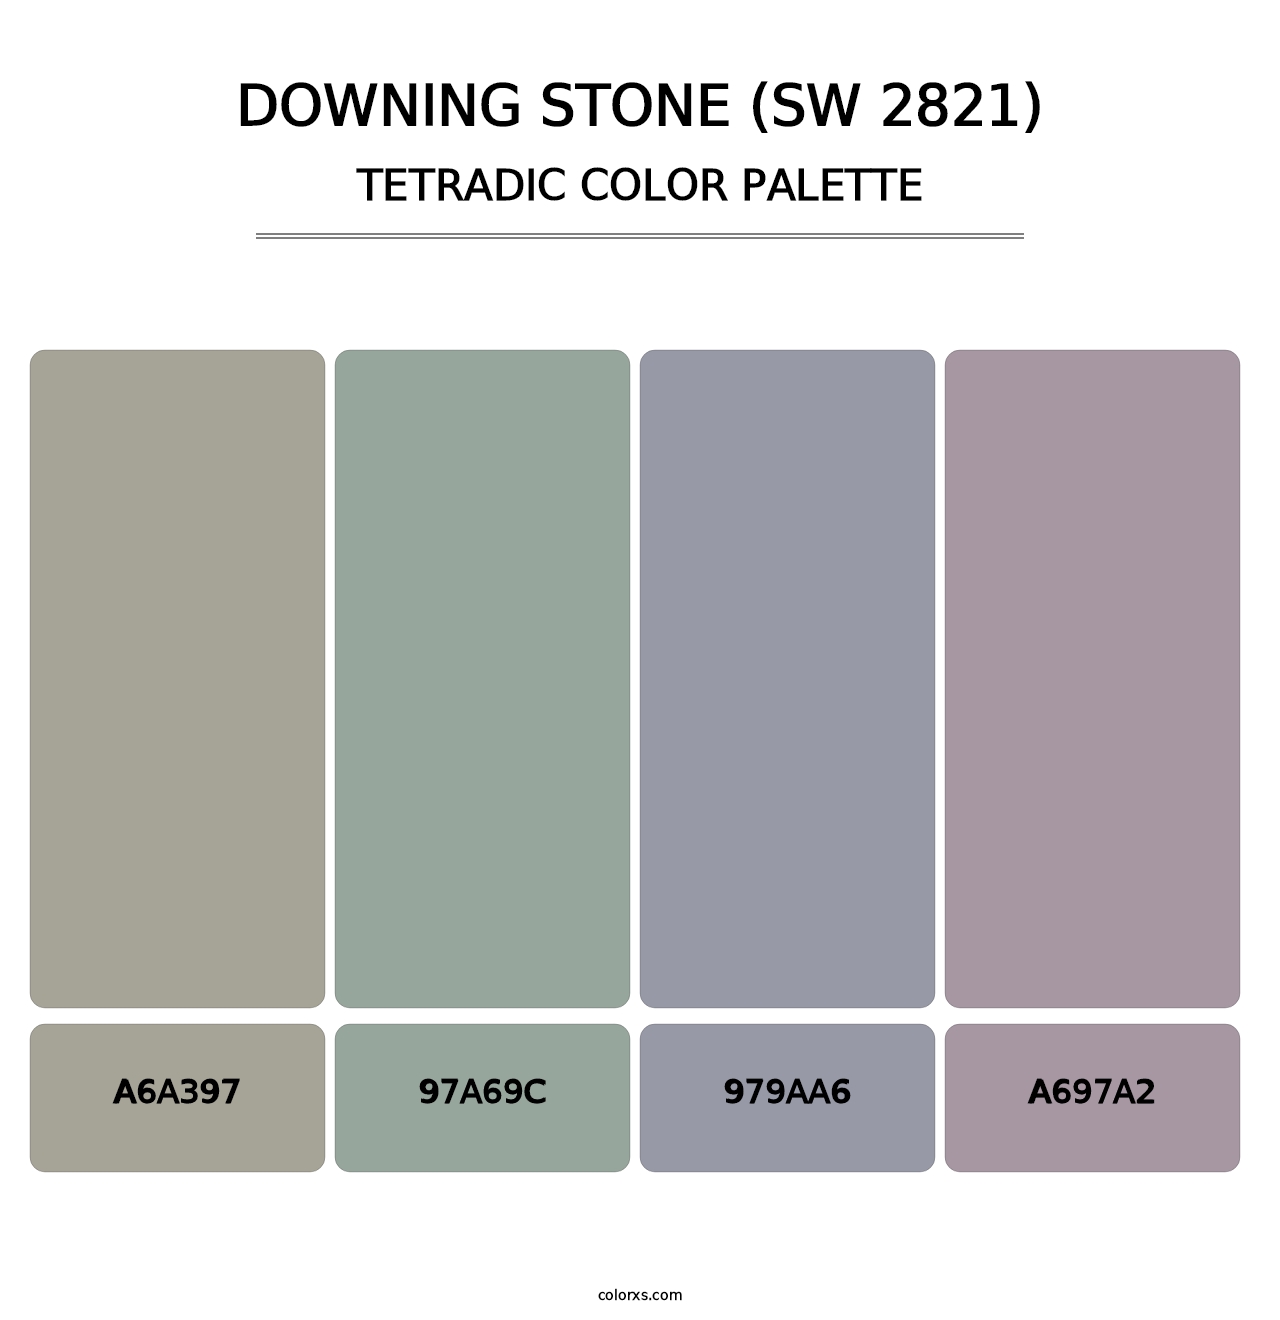 Downing Stone (SW 2821) - Tetradic Color Palette